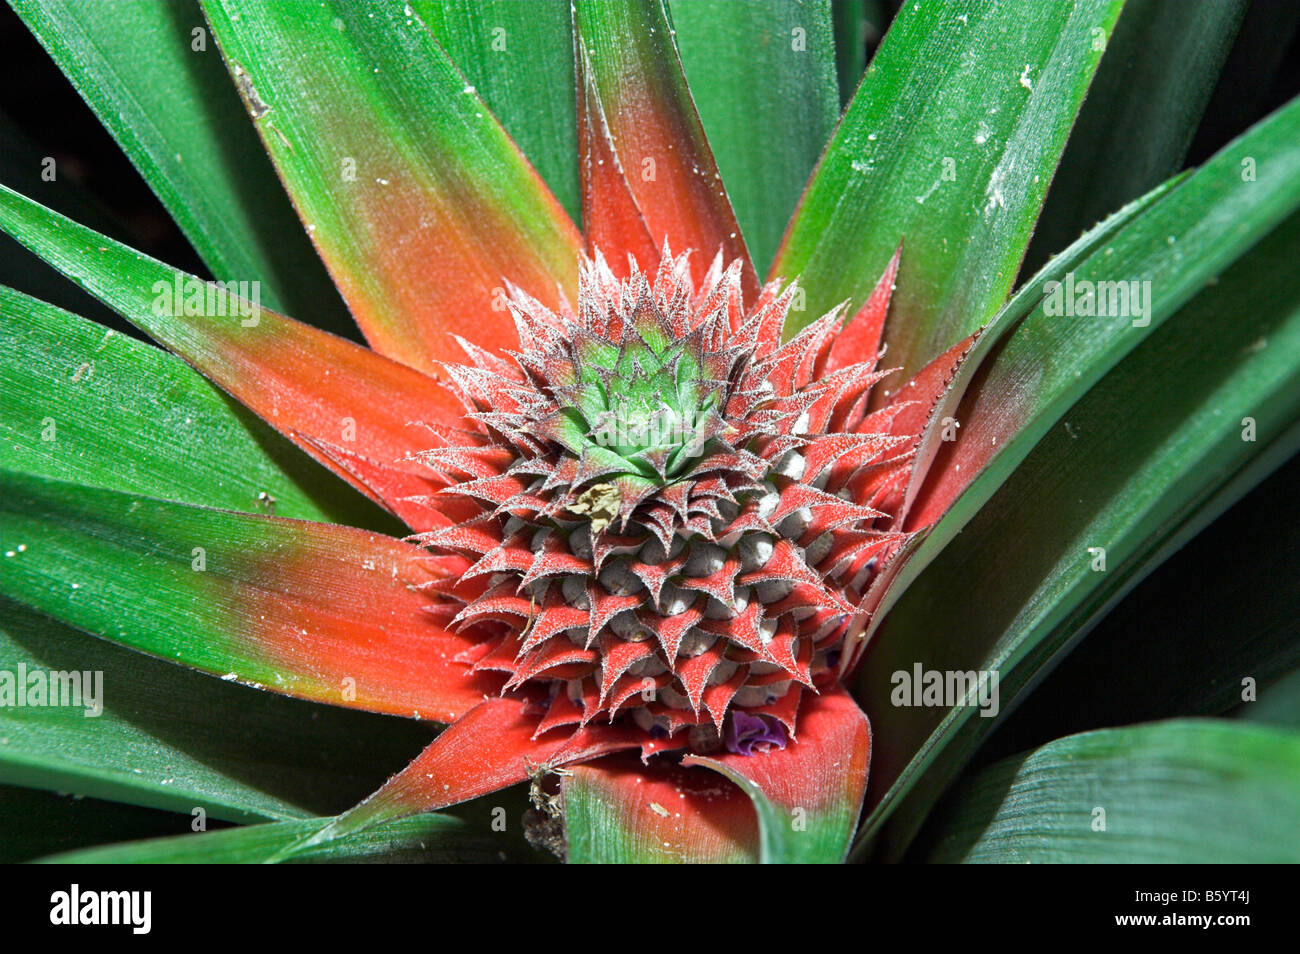 Young pineapple Ananas comosus starting to develop Stock Photo